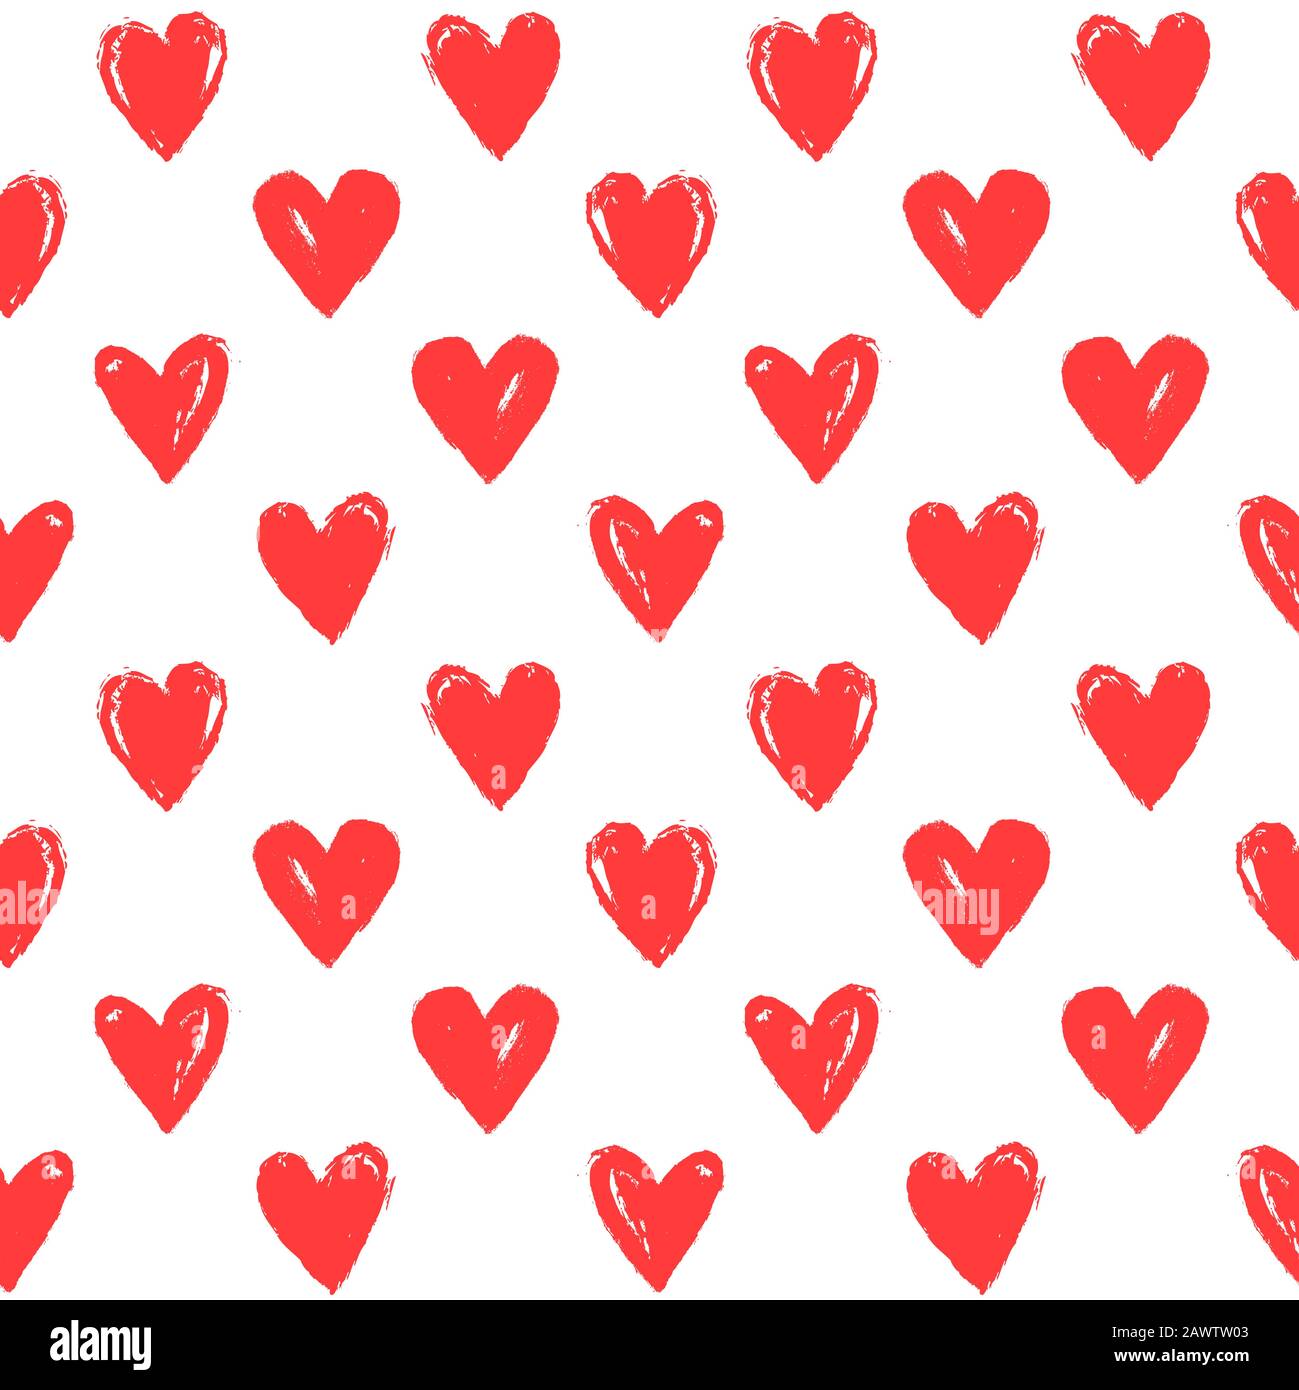 Seamless pattern with hand drawn hearts. White background and painted red hearts. Romantic vector illustration for love, wedding or Valentine's day de Stock Vector